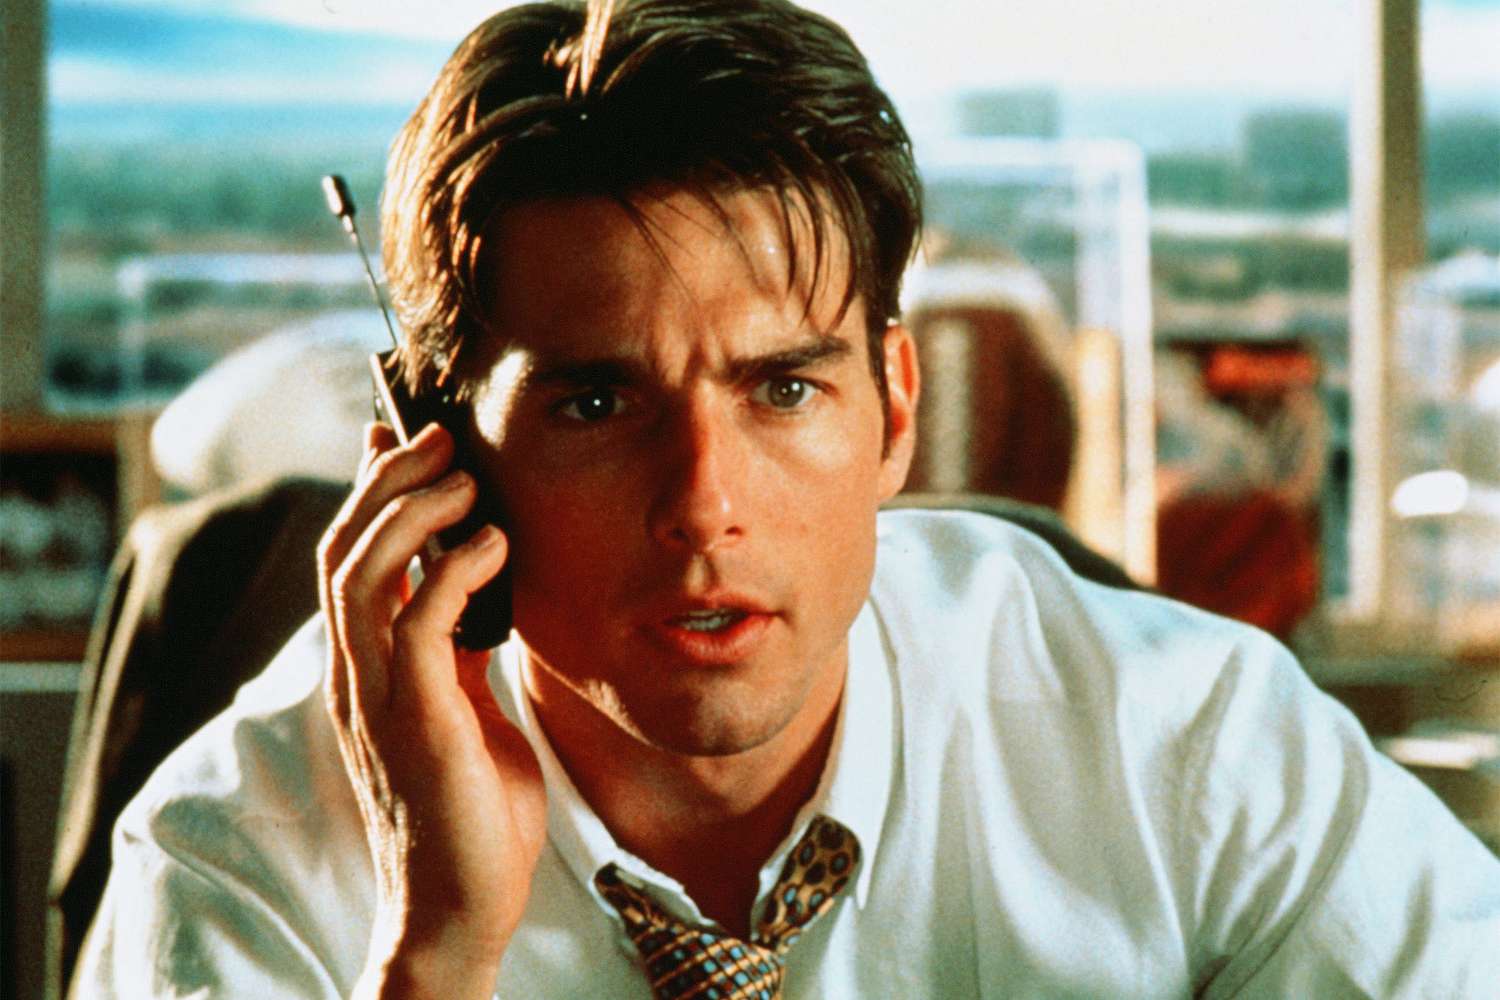 Editorial use only. No book cover usage. Mandatory Credit: Photo by Columbia Tri Star/Kobal/Shutterstock (5884614x) Tom Cruise Jerry Maguire - 1996 Director: Cameron Crowe Columbia Tri Star USA Scene Still Comedy/KBLDRAMA